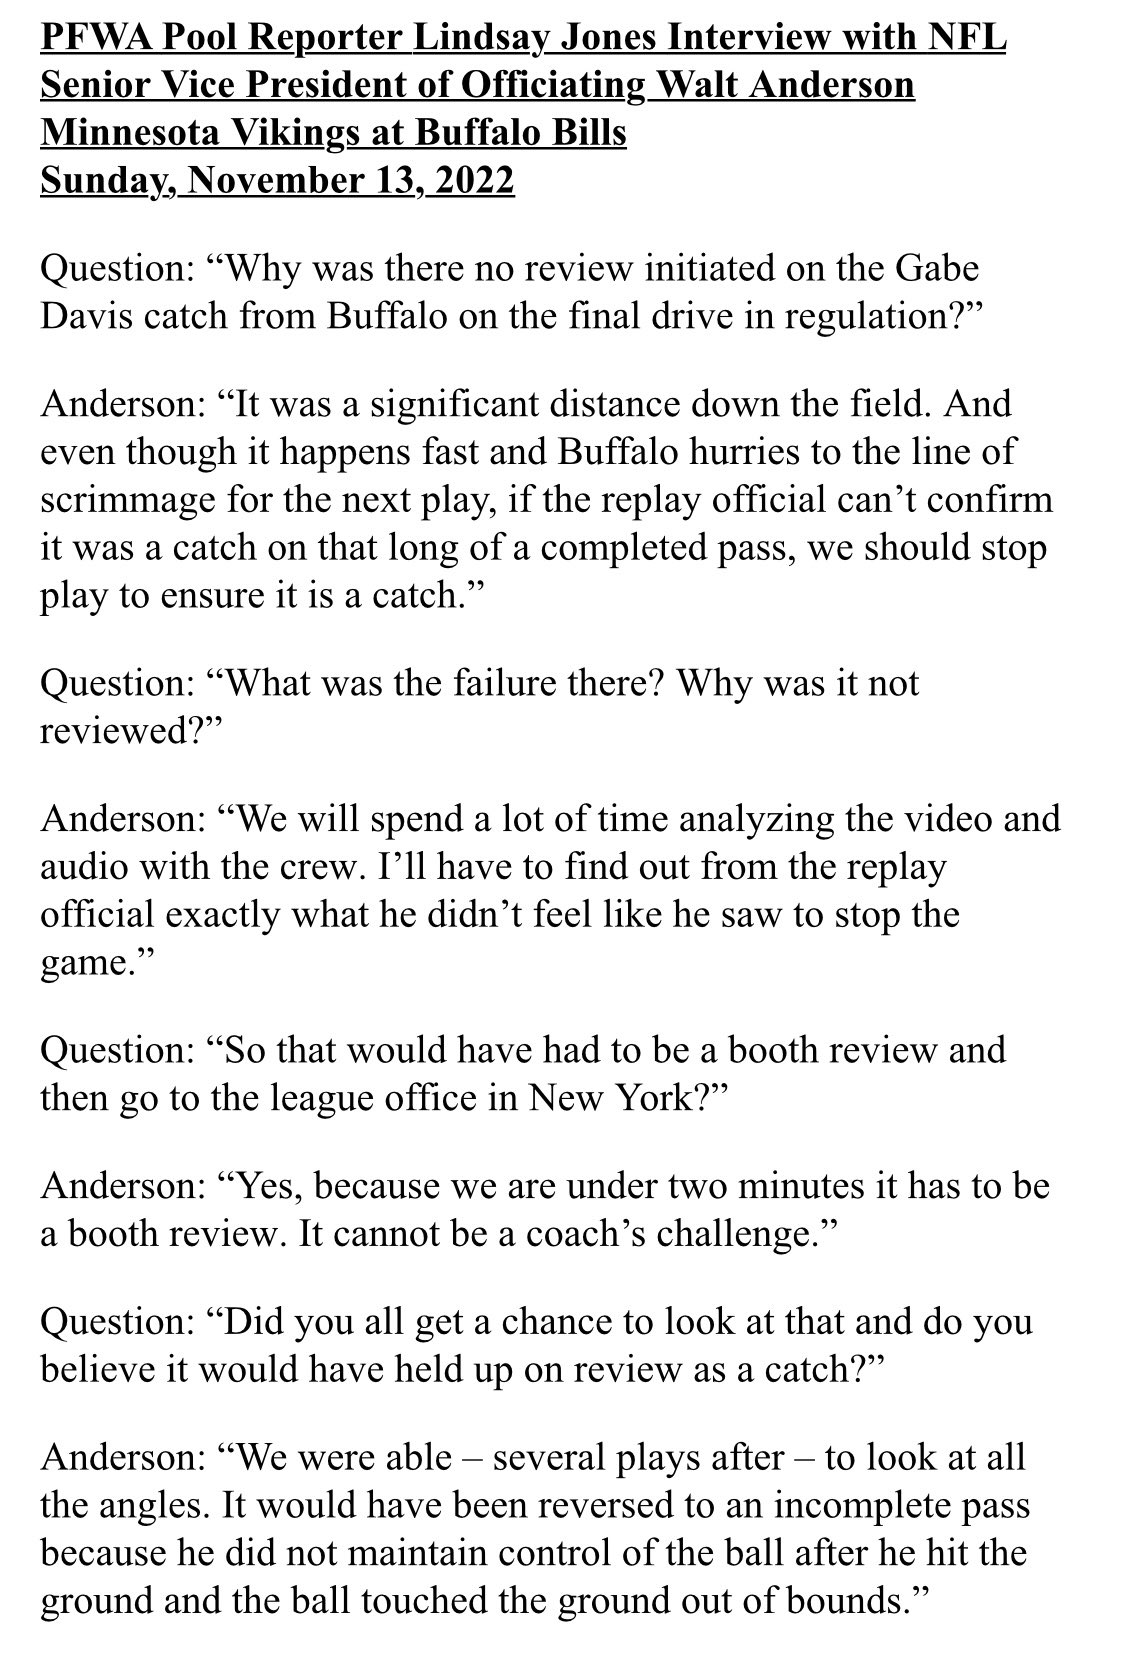 Tom Pelissero on X: 'NFL Senior VP of Officiating Walt Anderson told pool  reporter @bylindsayhjones that #Bills WR Gabe Davis' catch late in  regulation would've been reversed to an incompletion if the